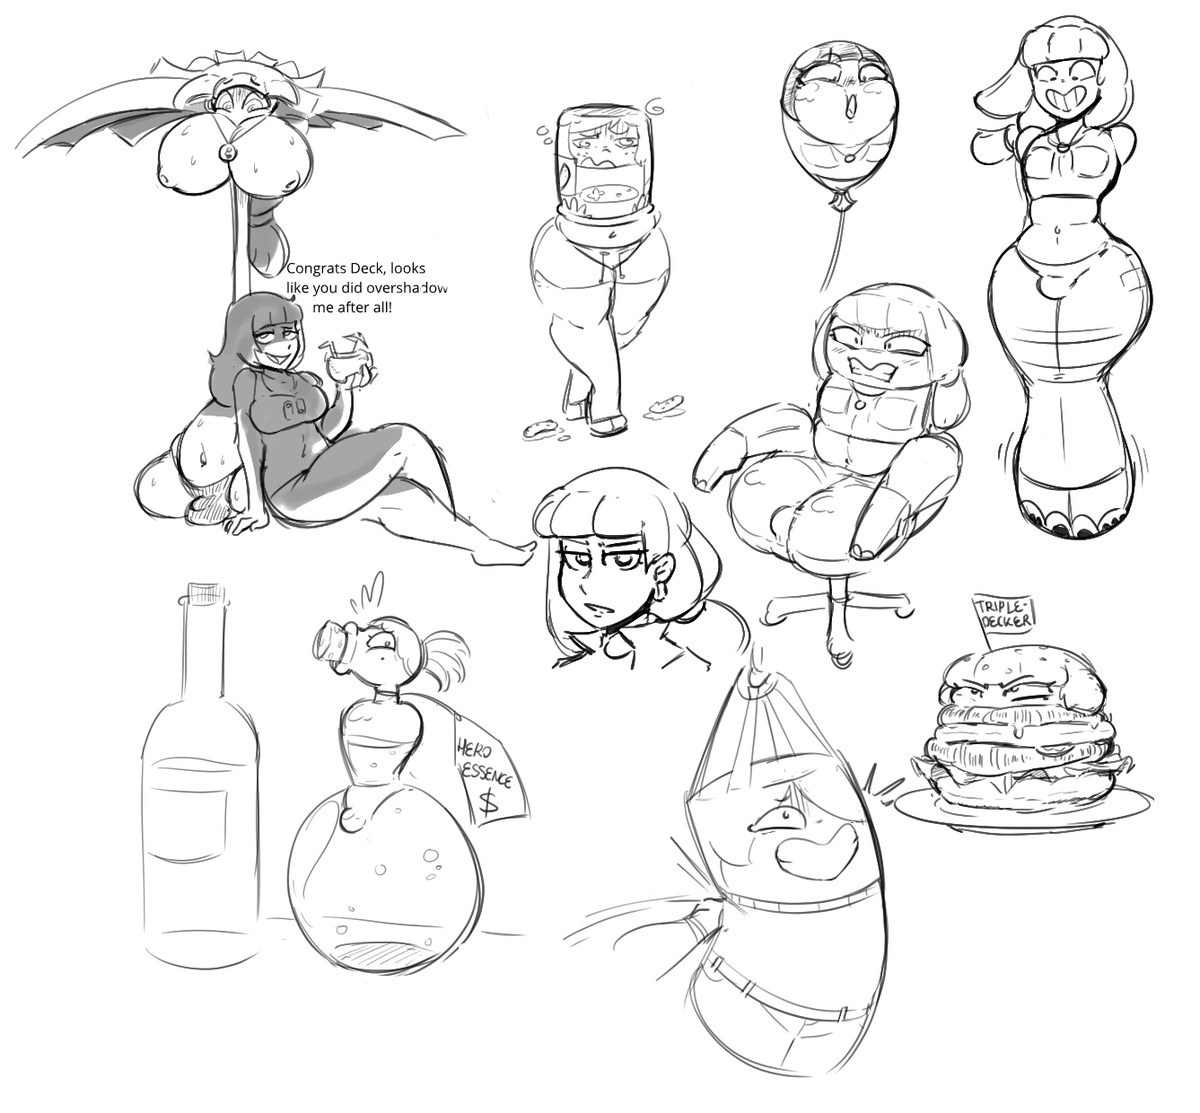 My bunch of silly doodles I did with @noah_buddy_art recently